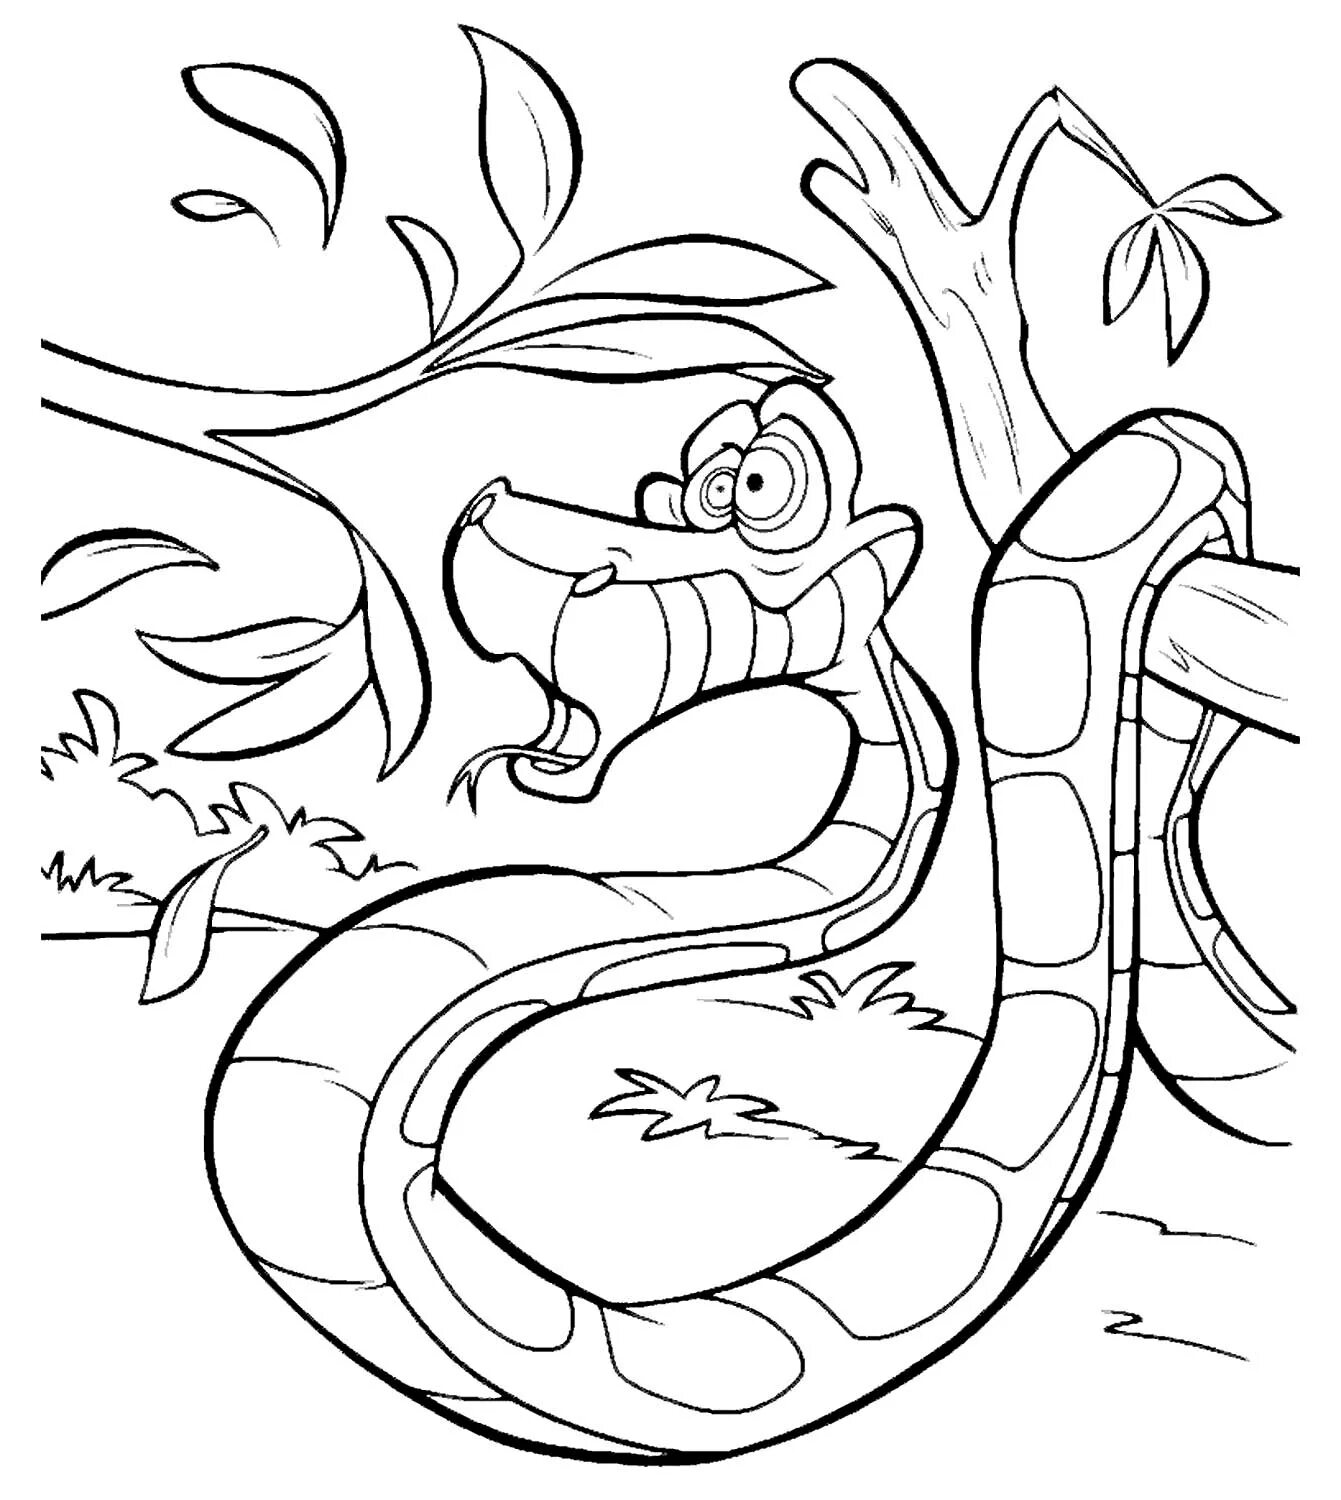 Kaa's impressive coloring page